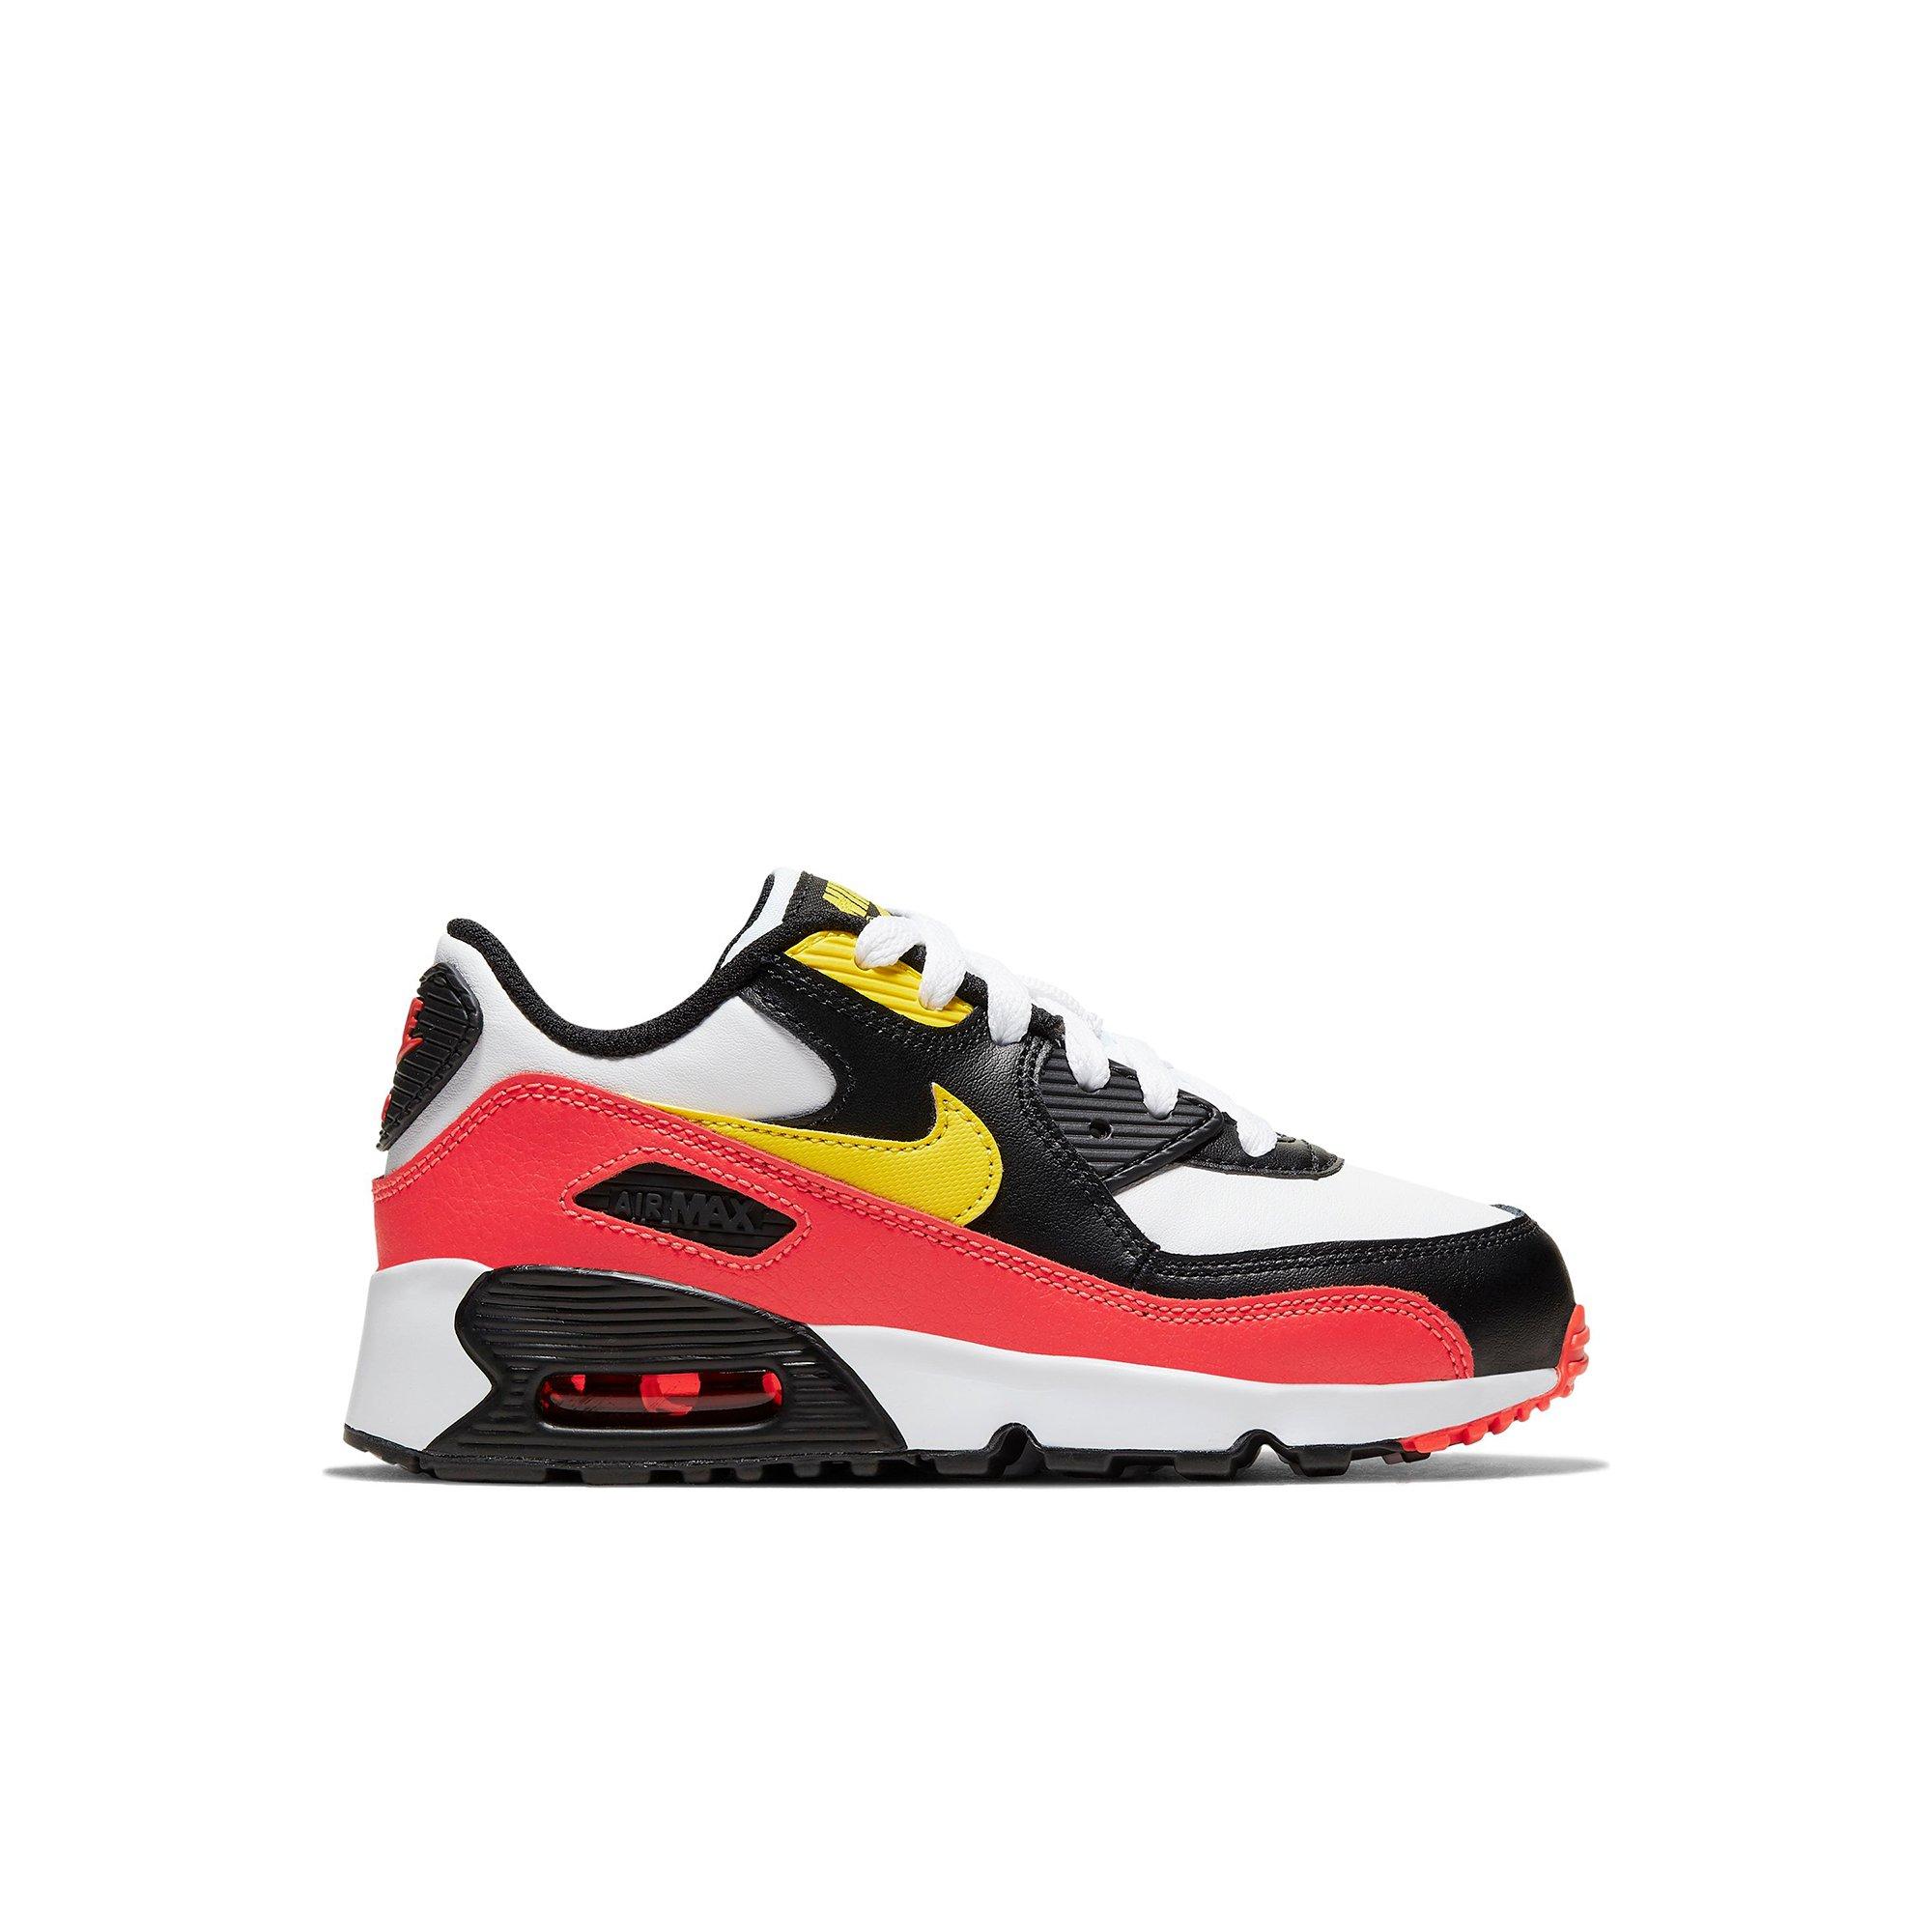 red yellow black shoes